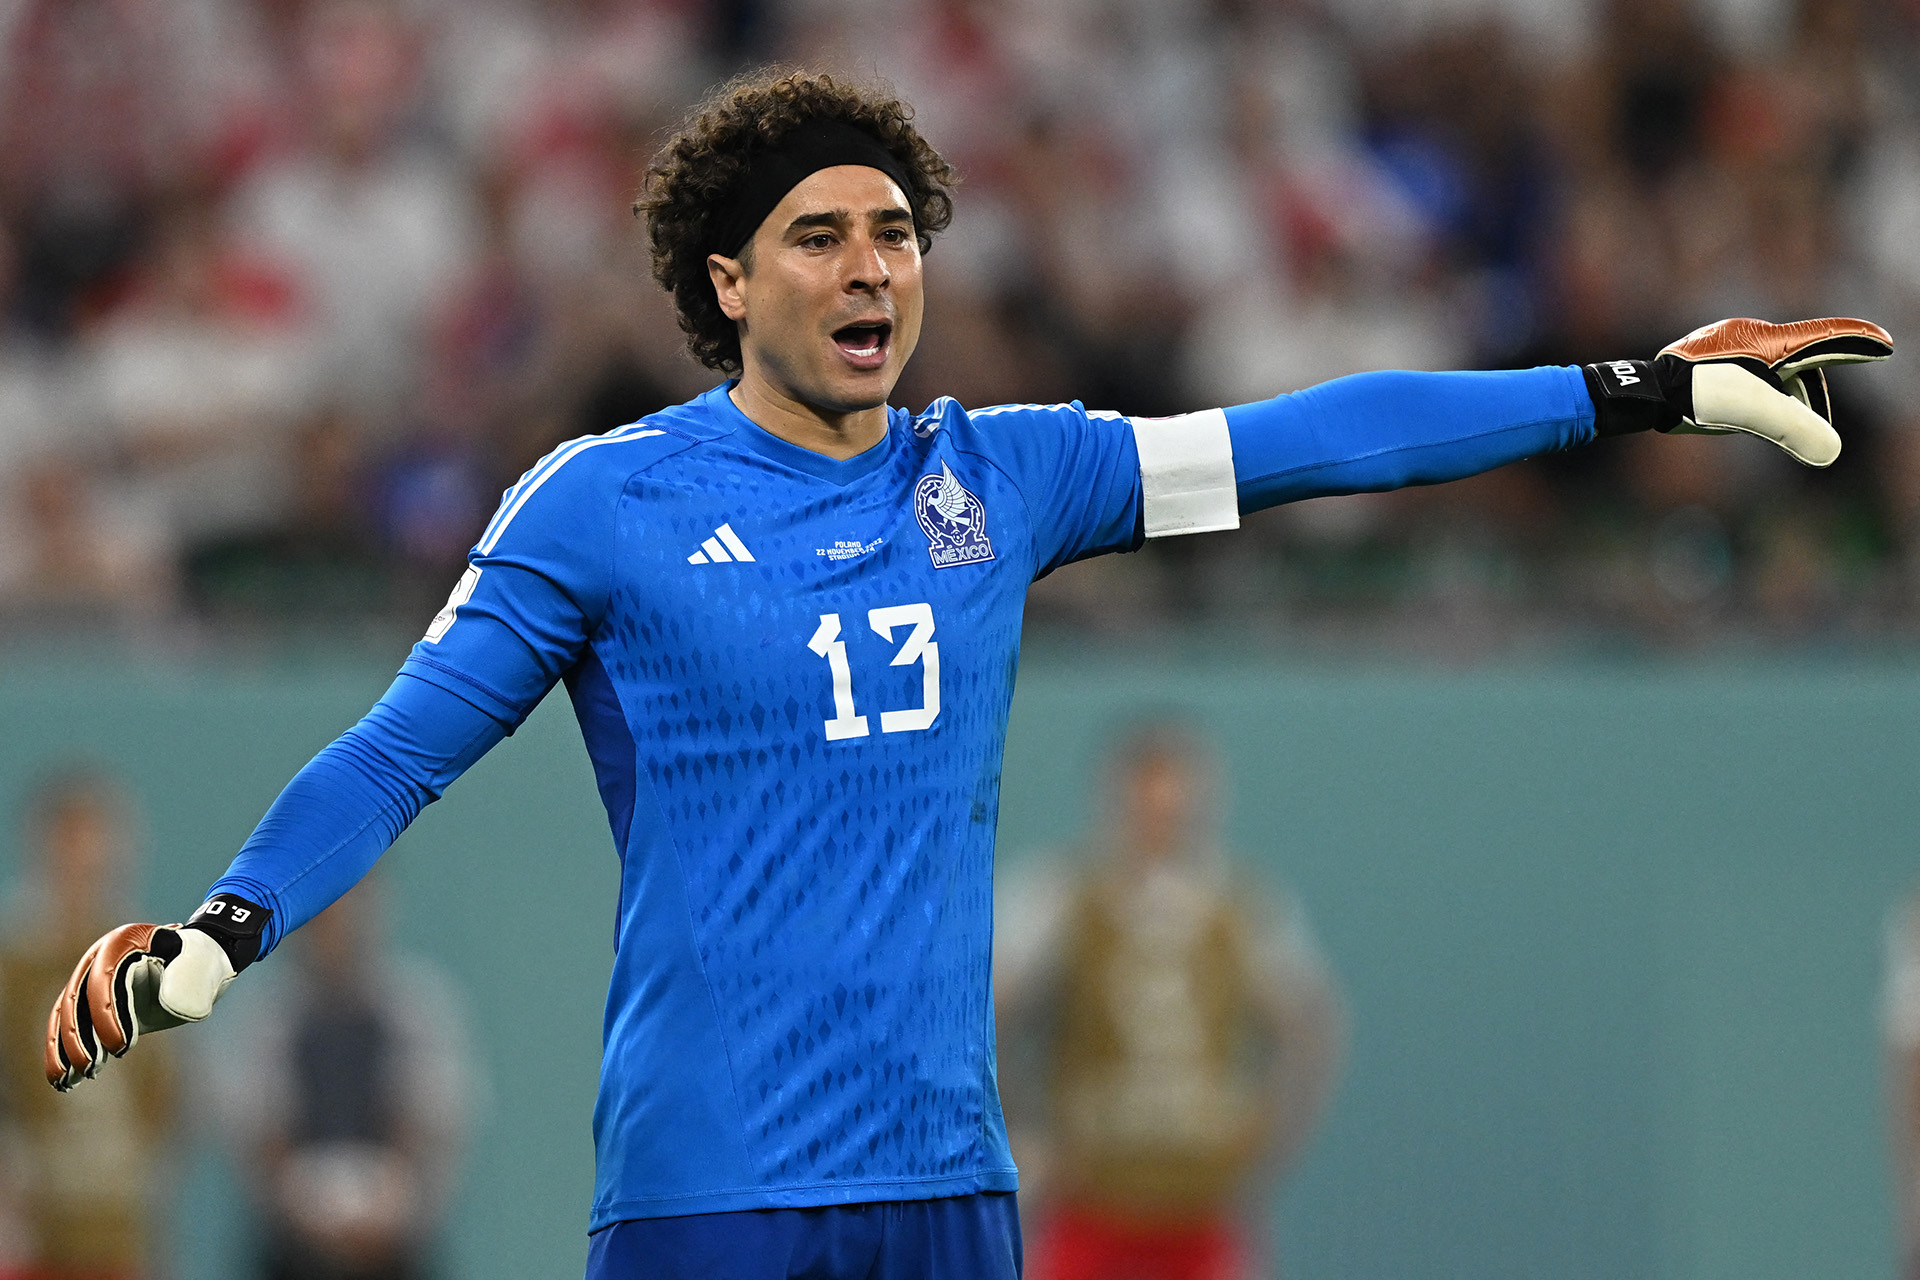 Mexico's goalkeeper #13 Guillermo Ochoa gestures during the Qatar 2022 World Cup Group C football match between Mexico and Poland at Stadium 974 in Doha on November 22, 2022. (Photo by MANAN VATSYAYANA / AFP)